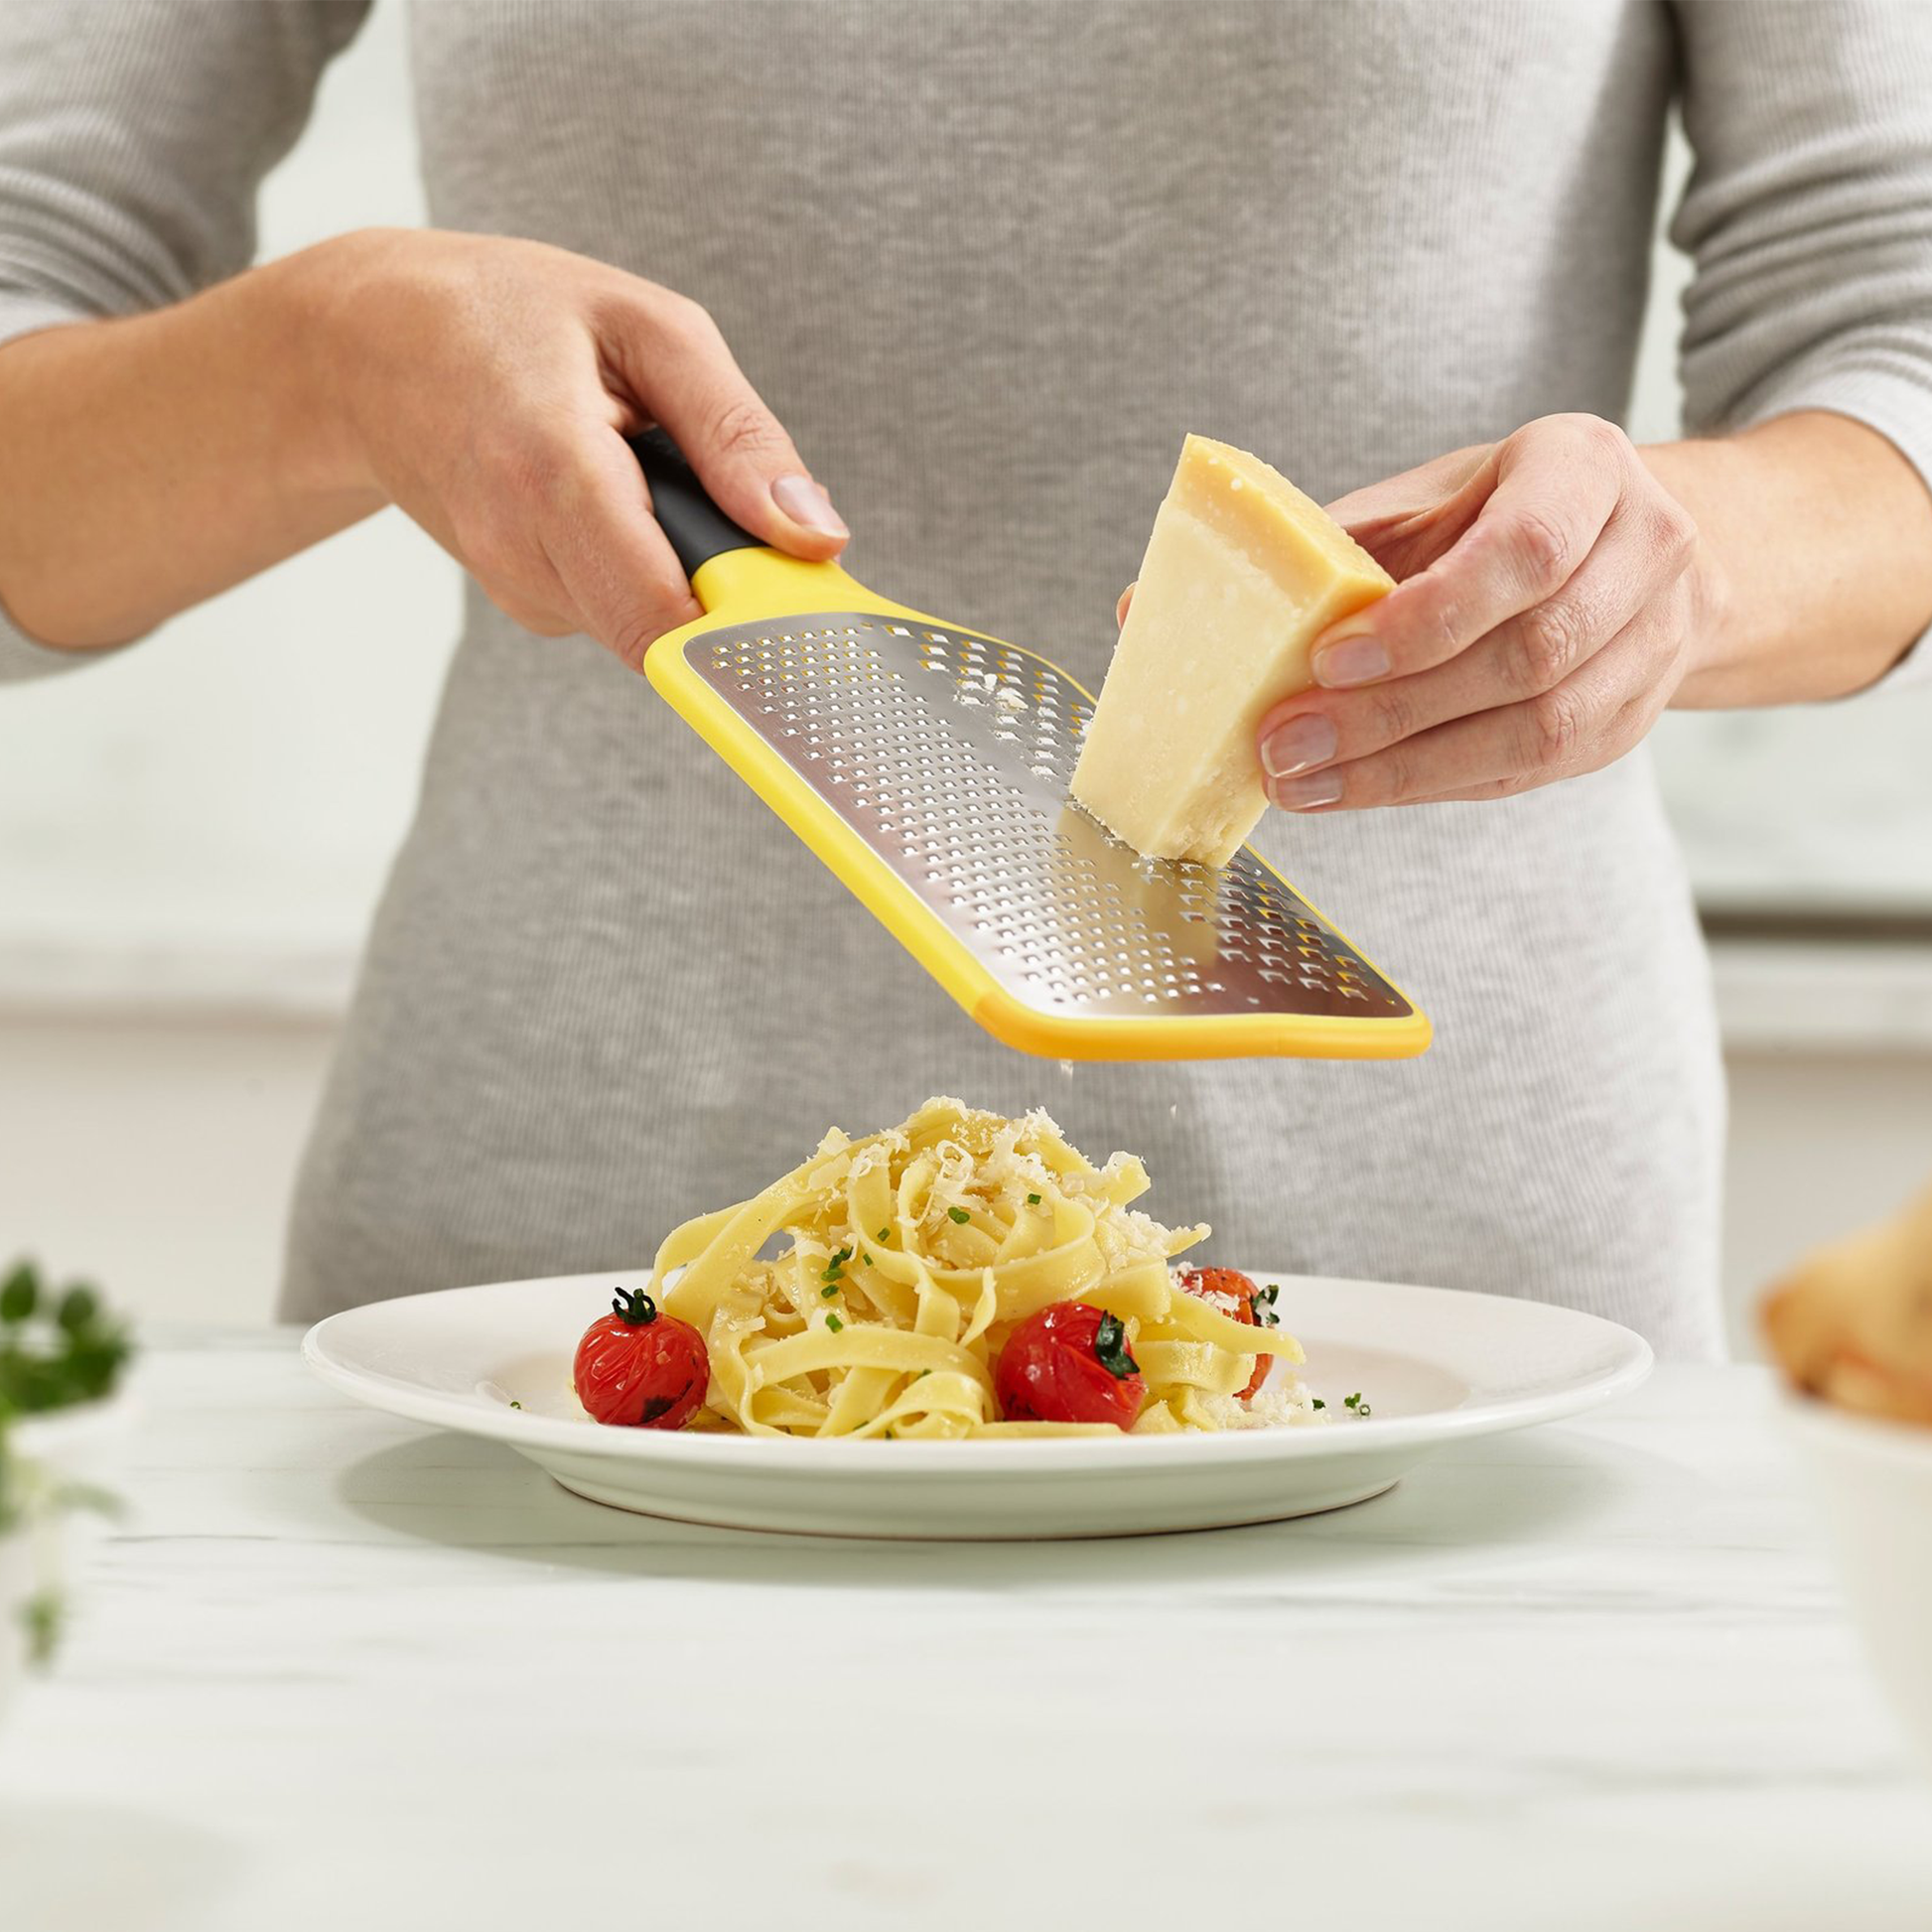 The multi-grate paddle grater grating parmesan cheese